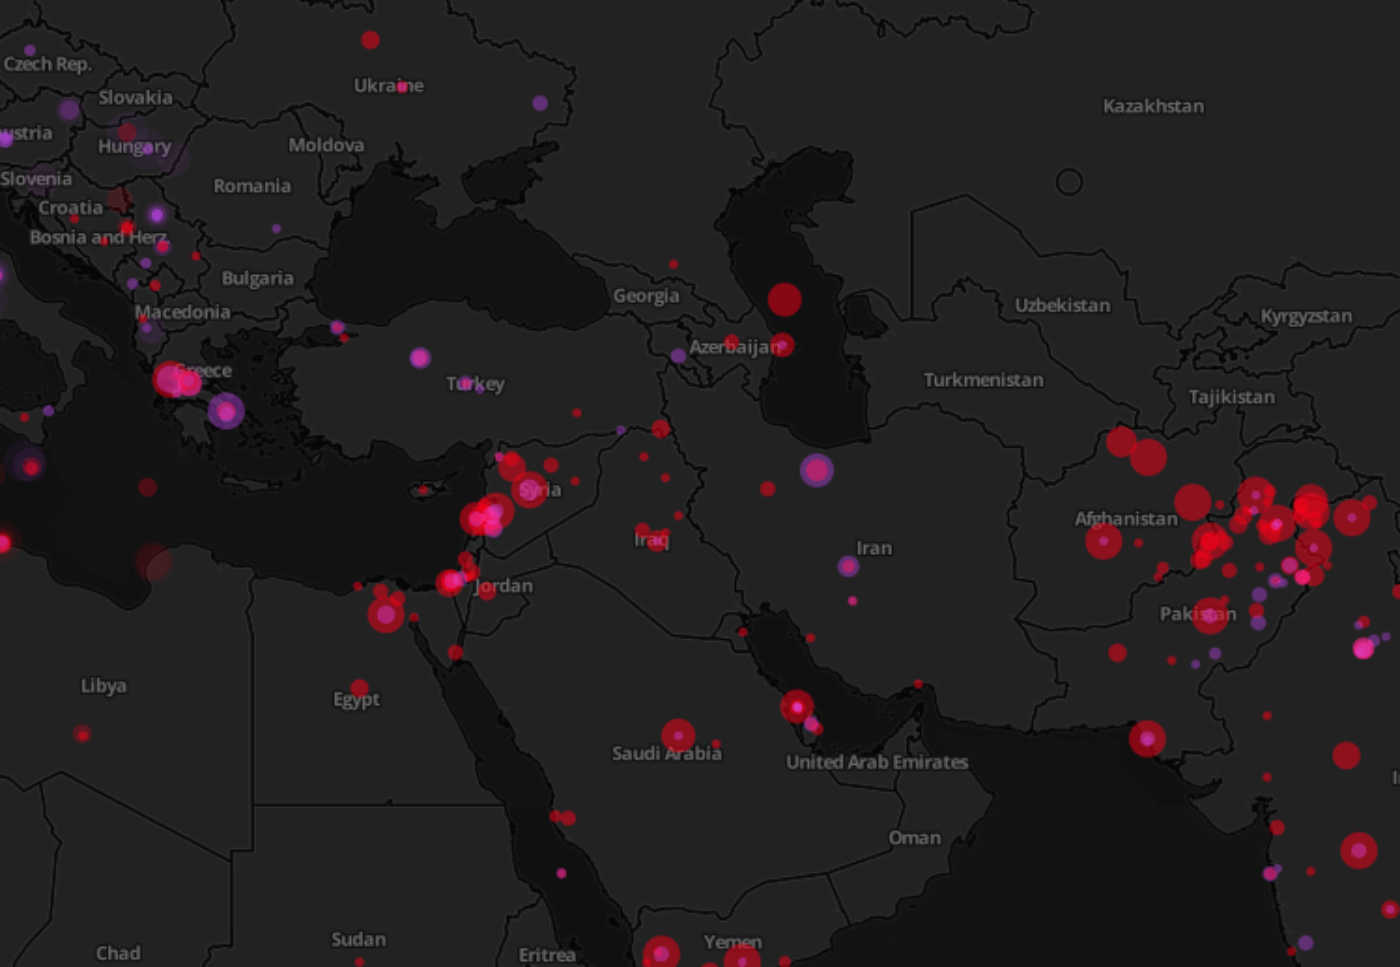 Mapping Conflicts around the World